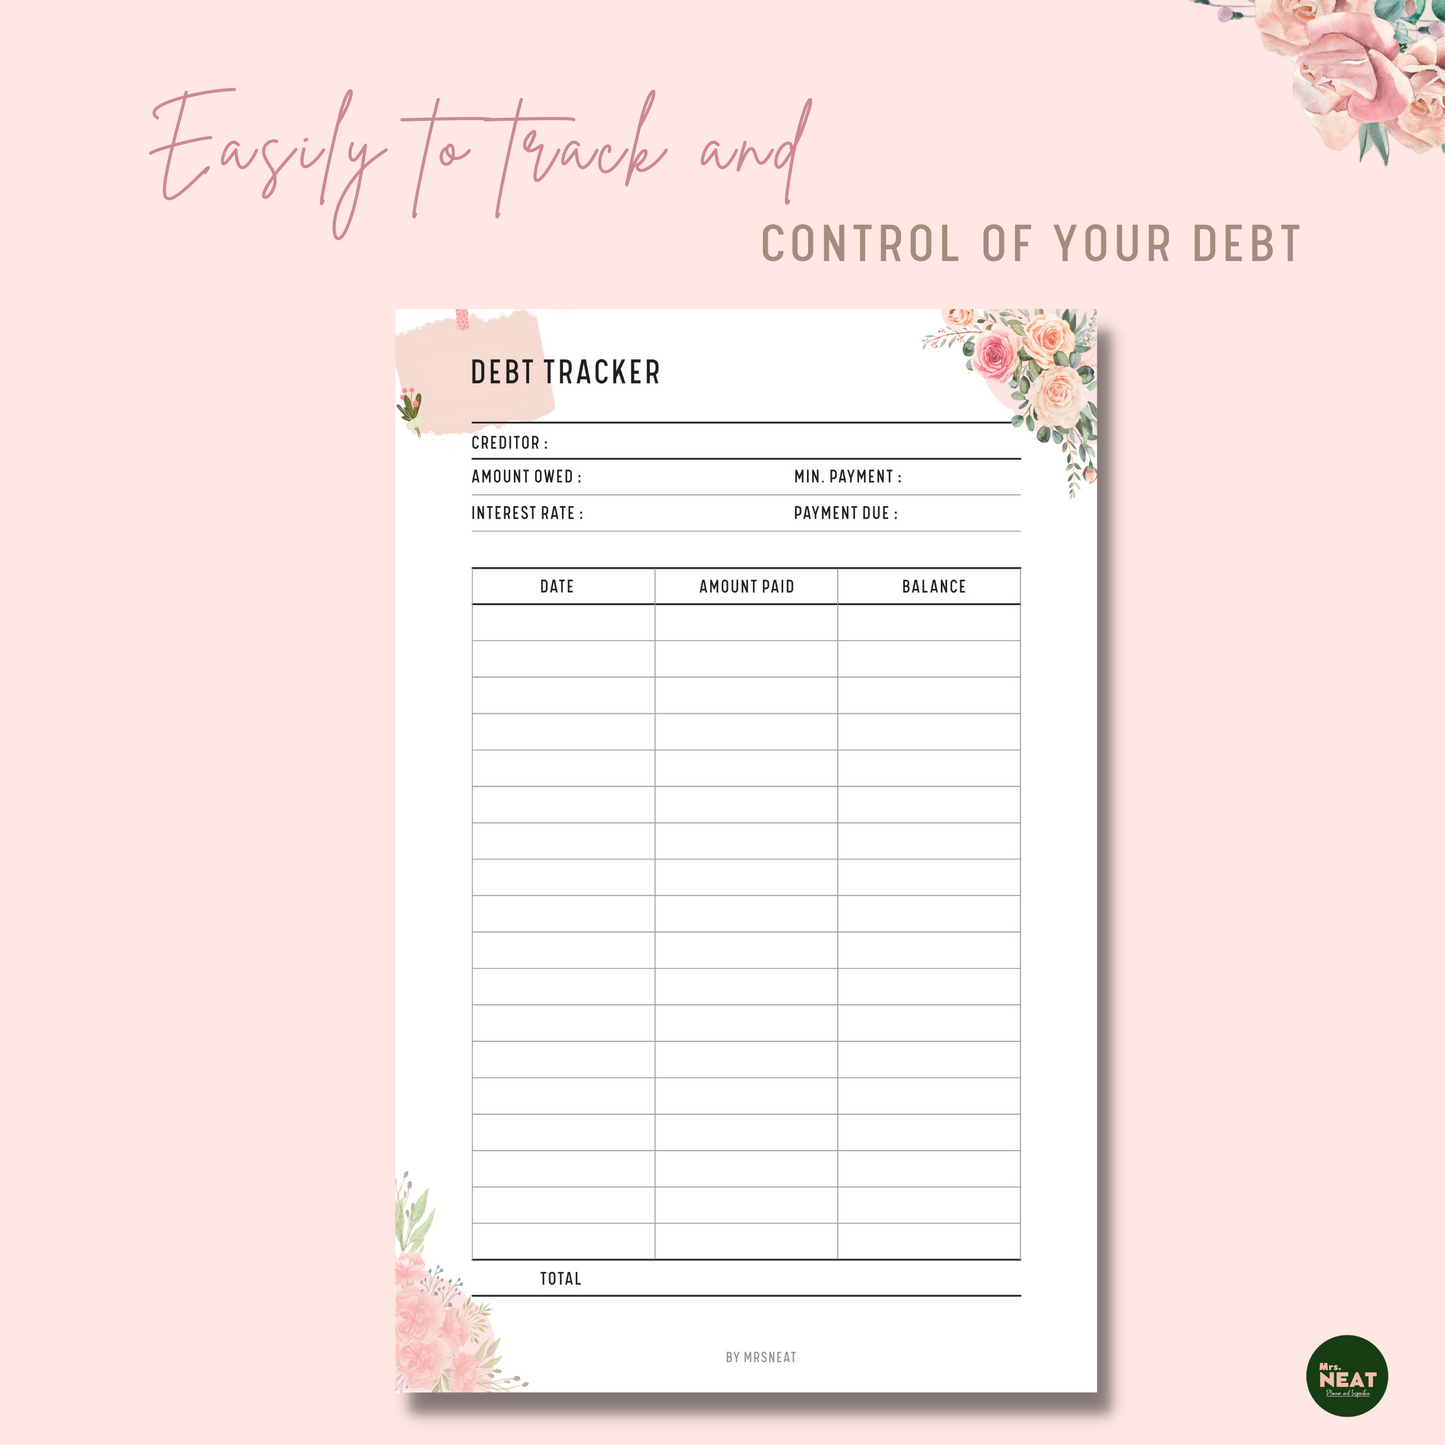 Floral Debt Payment Tracker Planner with room for creditor, amount owed, interest rate, minimal pay and payment due